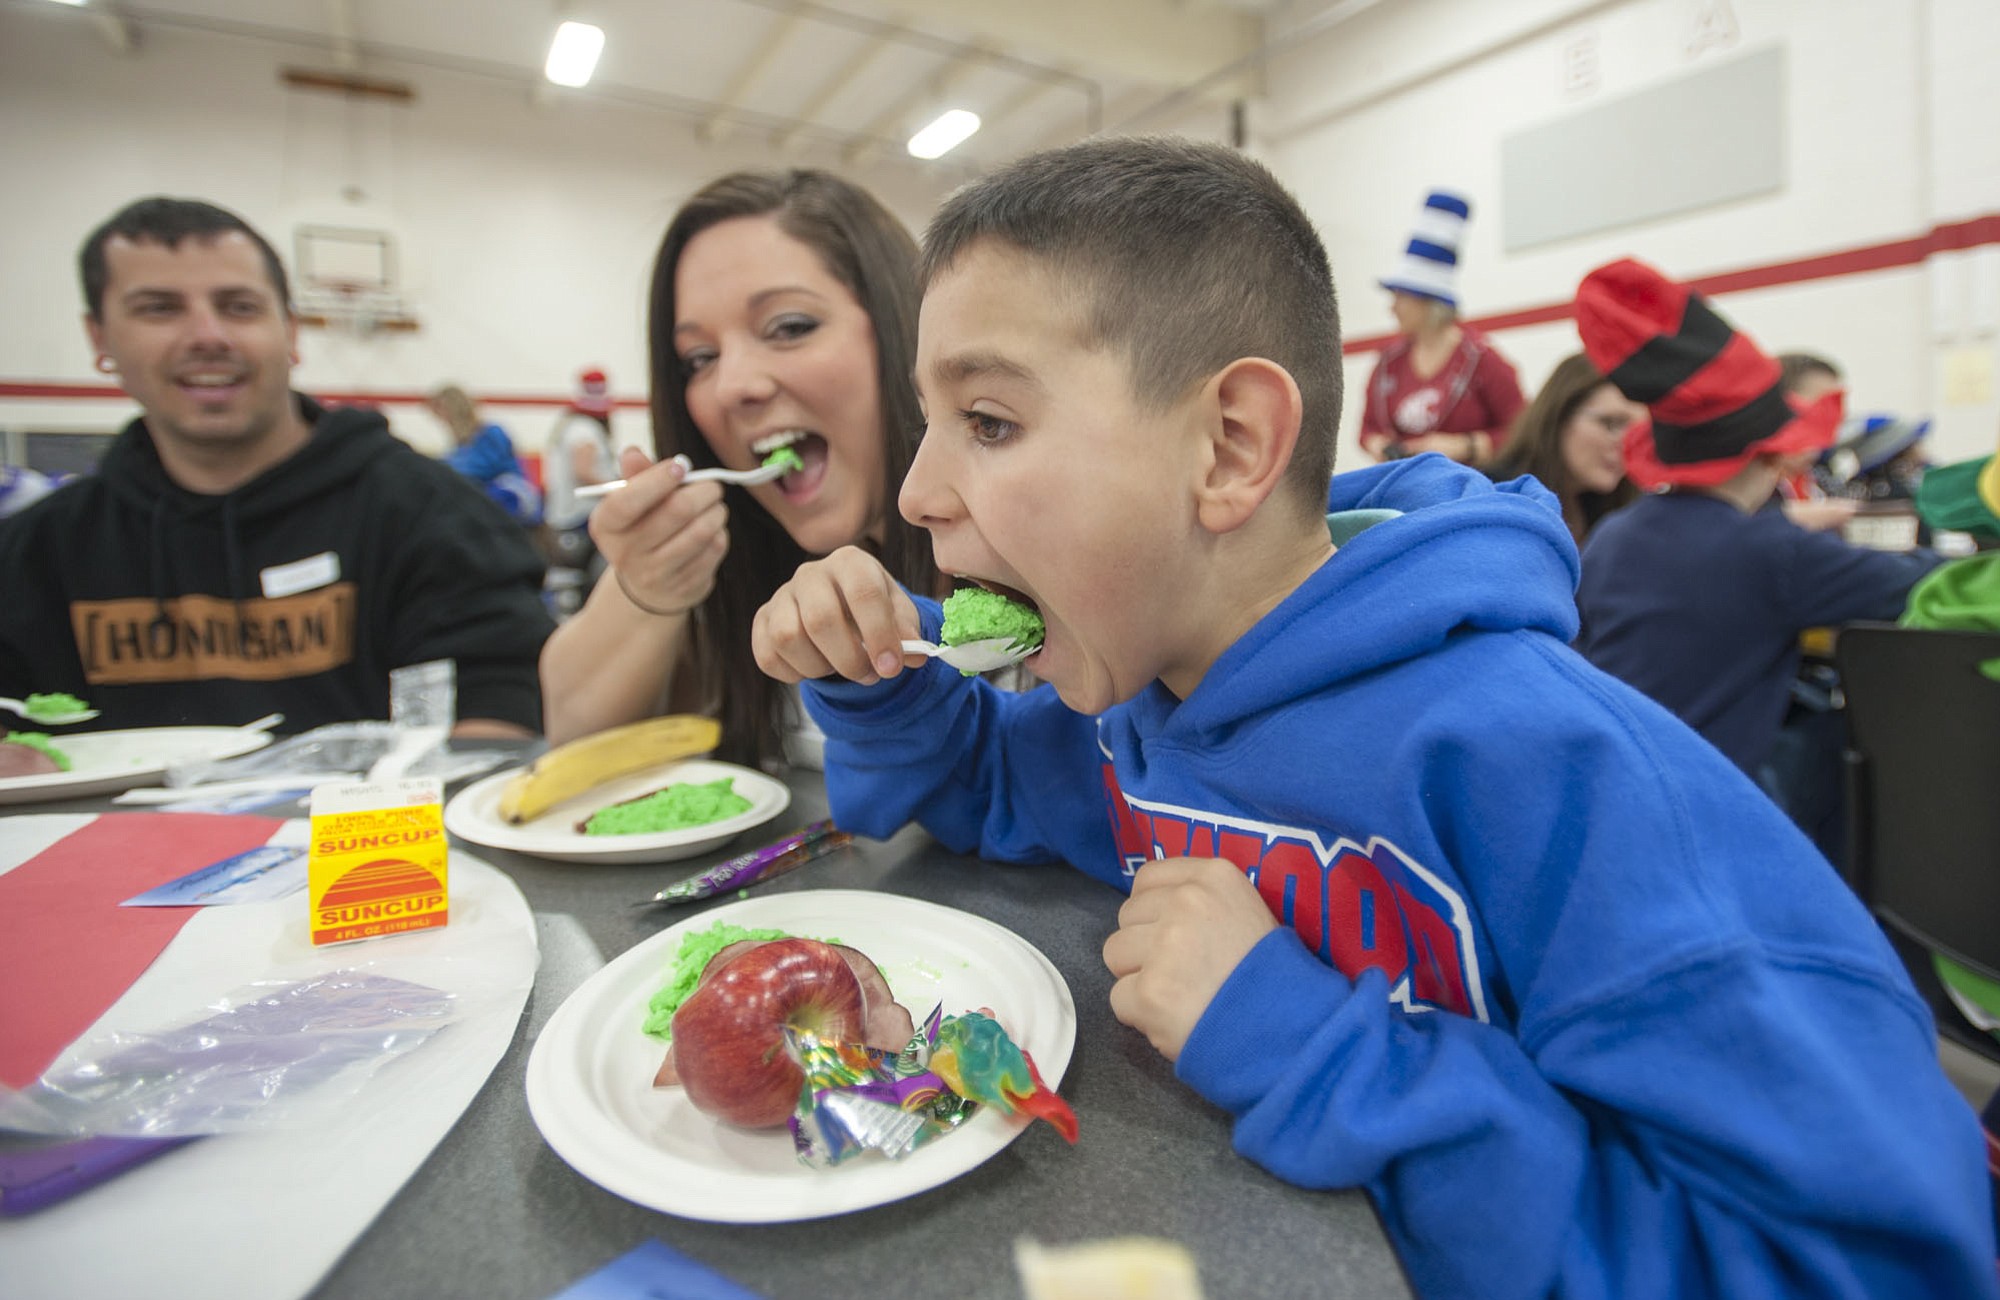 Skyler Dassinger takes a giant bite of green eggs with his mon Cassandra Gonzalez they enjoy a breakfast of green eggs and ham at Walnut Grove Elementary in Vancouver Wednesday February 25, 2015. The breakfast was provided by Beaches restaurant, in honor of Dr. Seuss' birthday.